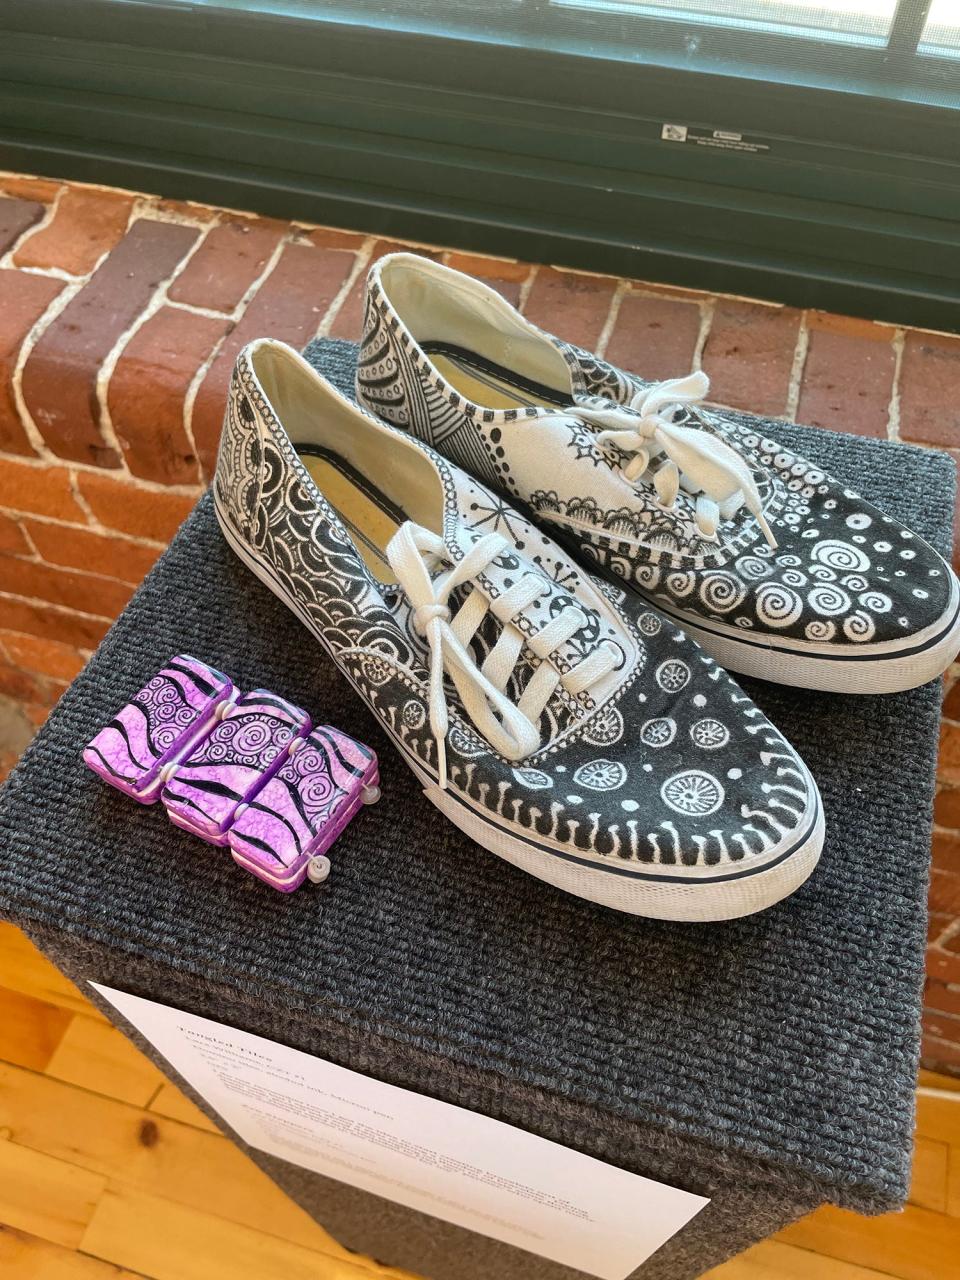 Lara Williams, who used to work at Alternatives Unlimited (a precursor to Open Sky), created several pieces for the exhibit, including "Zen Steppers," a pair of sneakers, and "Tangled Tiles," a bracelet using Domino pieces.